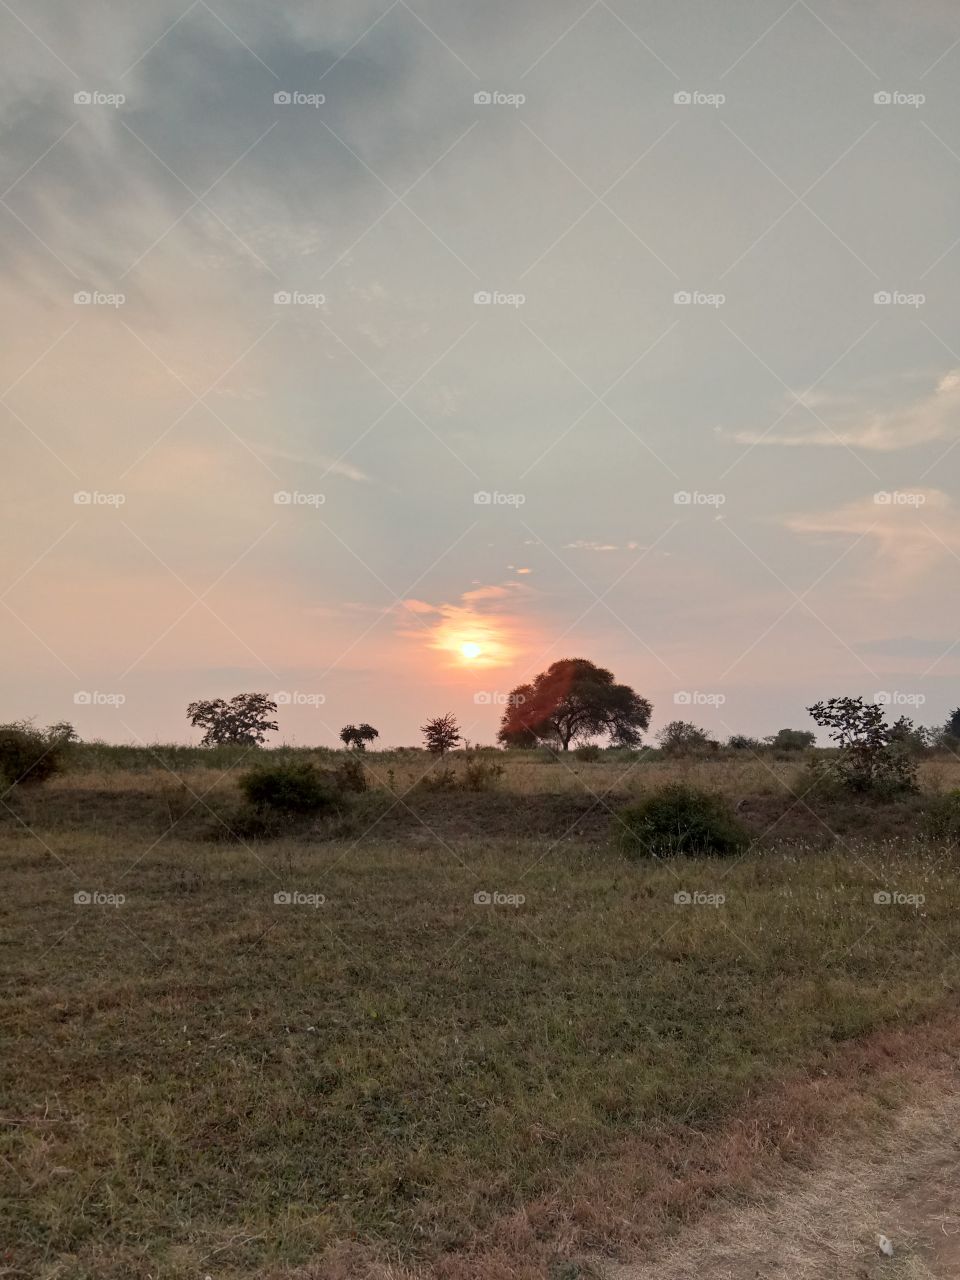 sun set at 5 pm in India